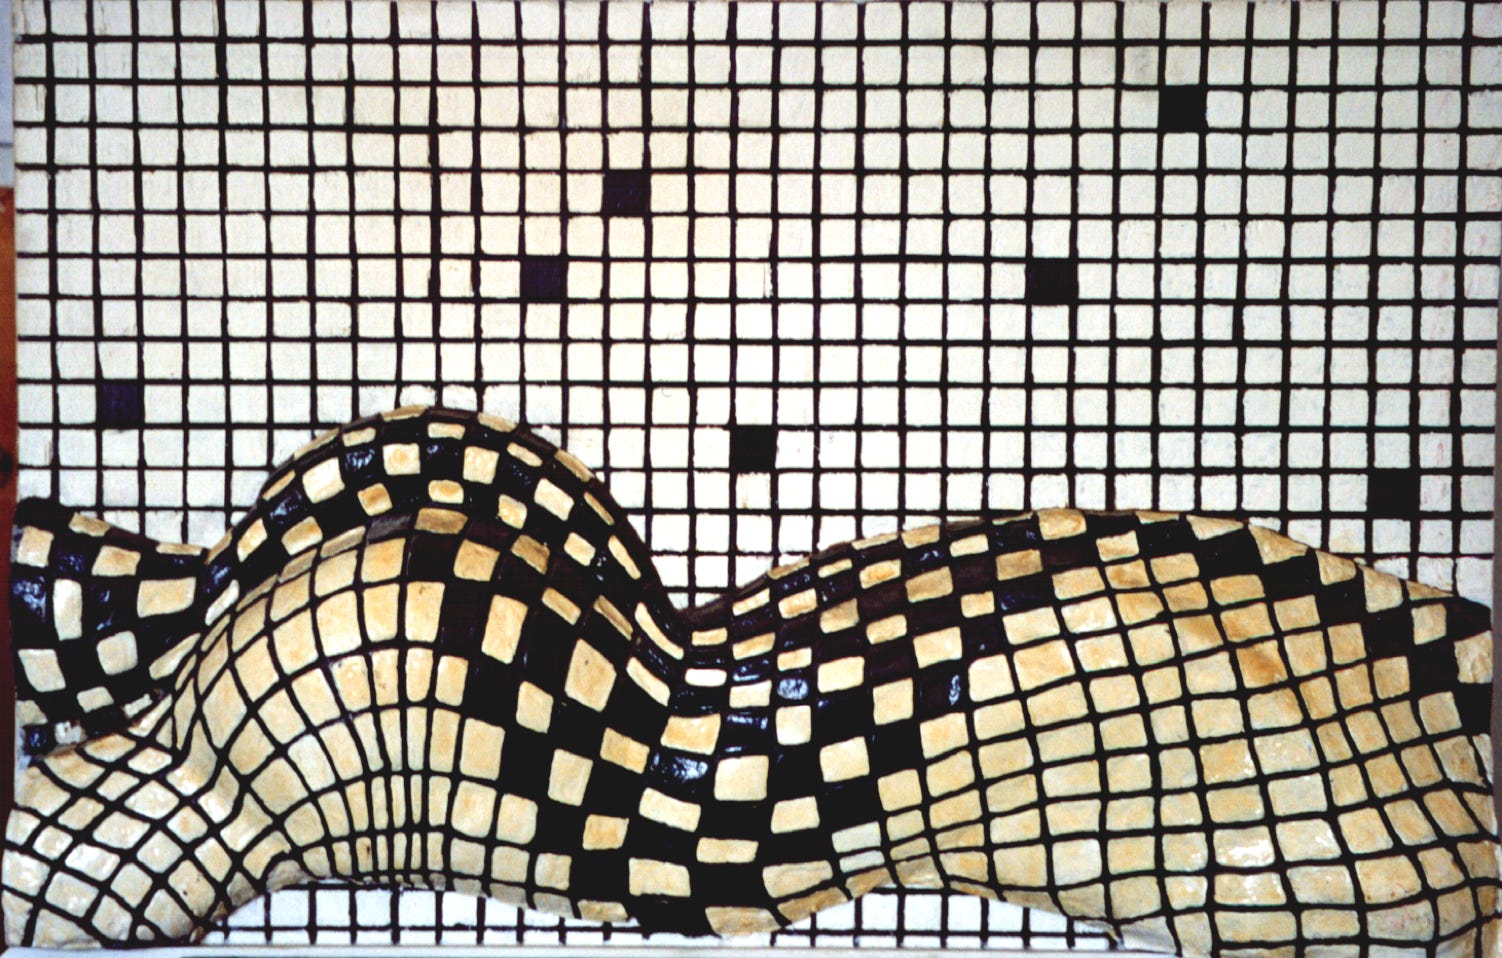 Scale model of a male body made of ceramic tiles